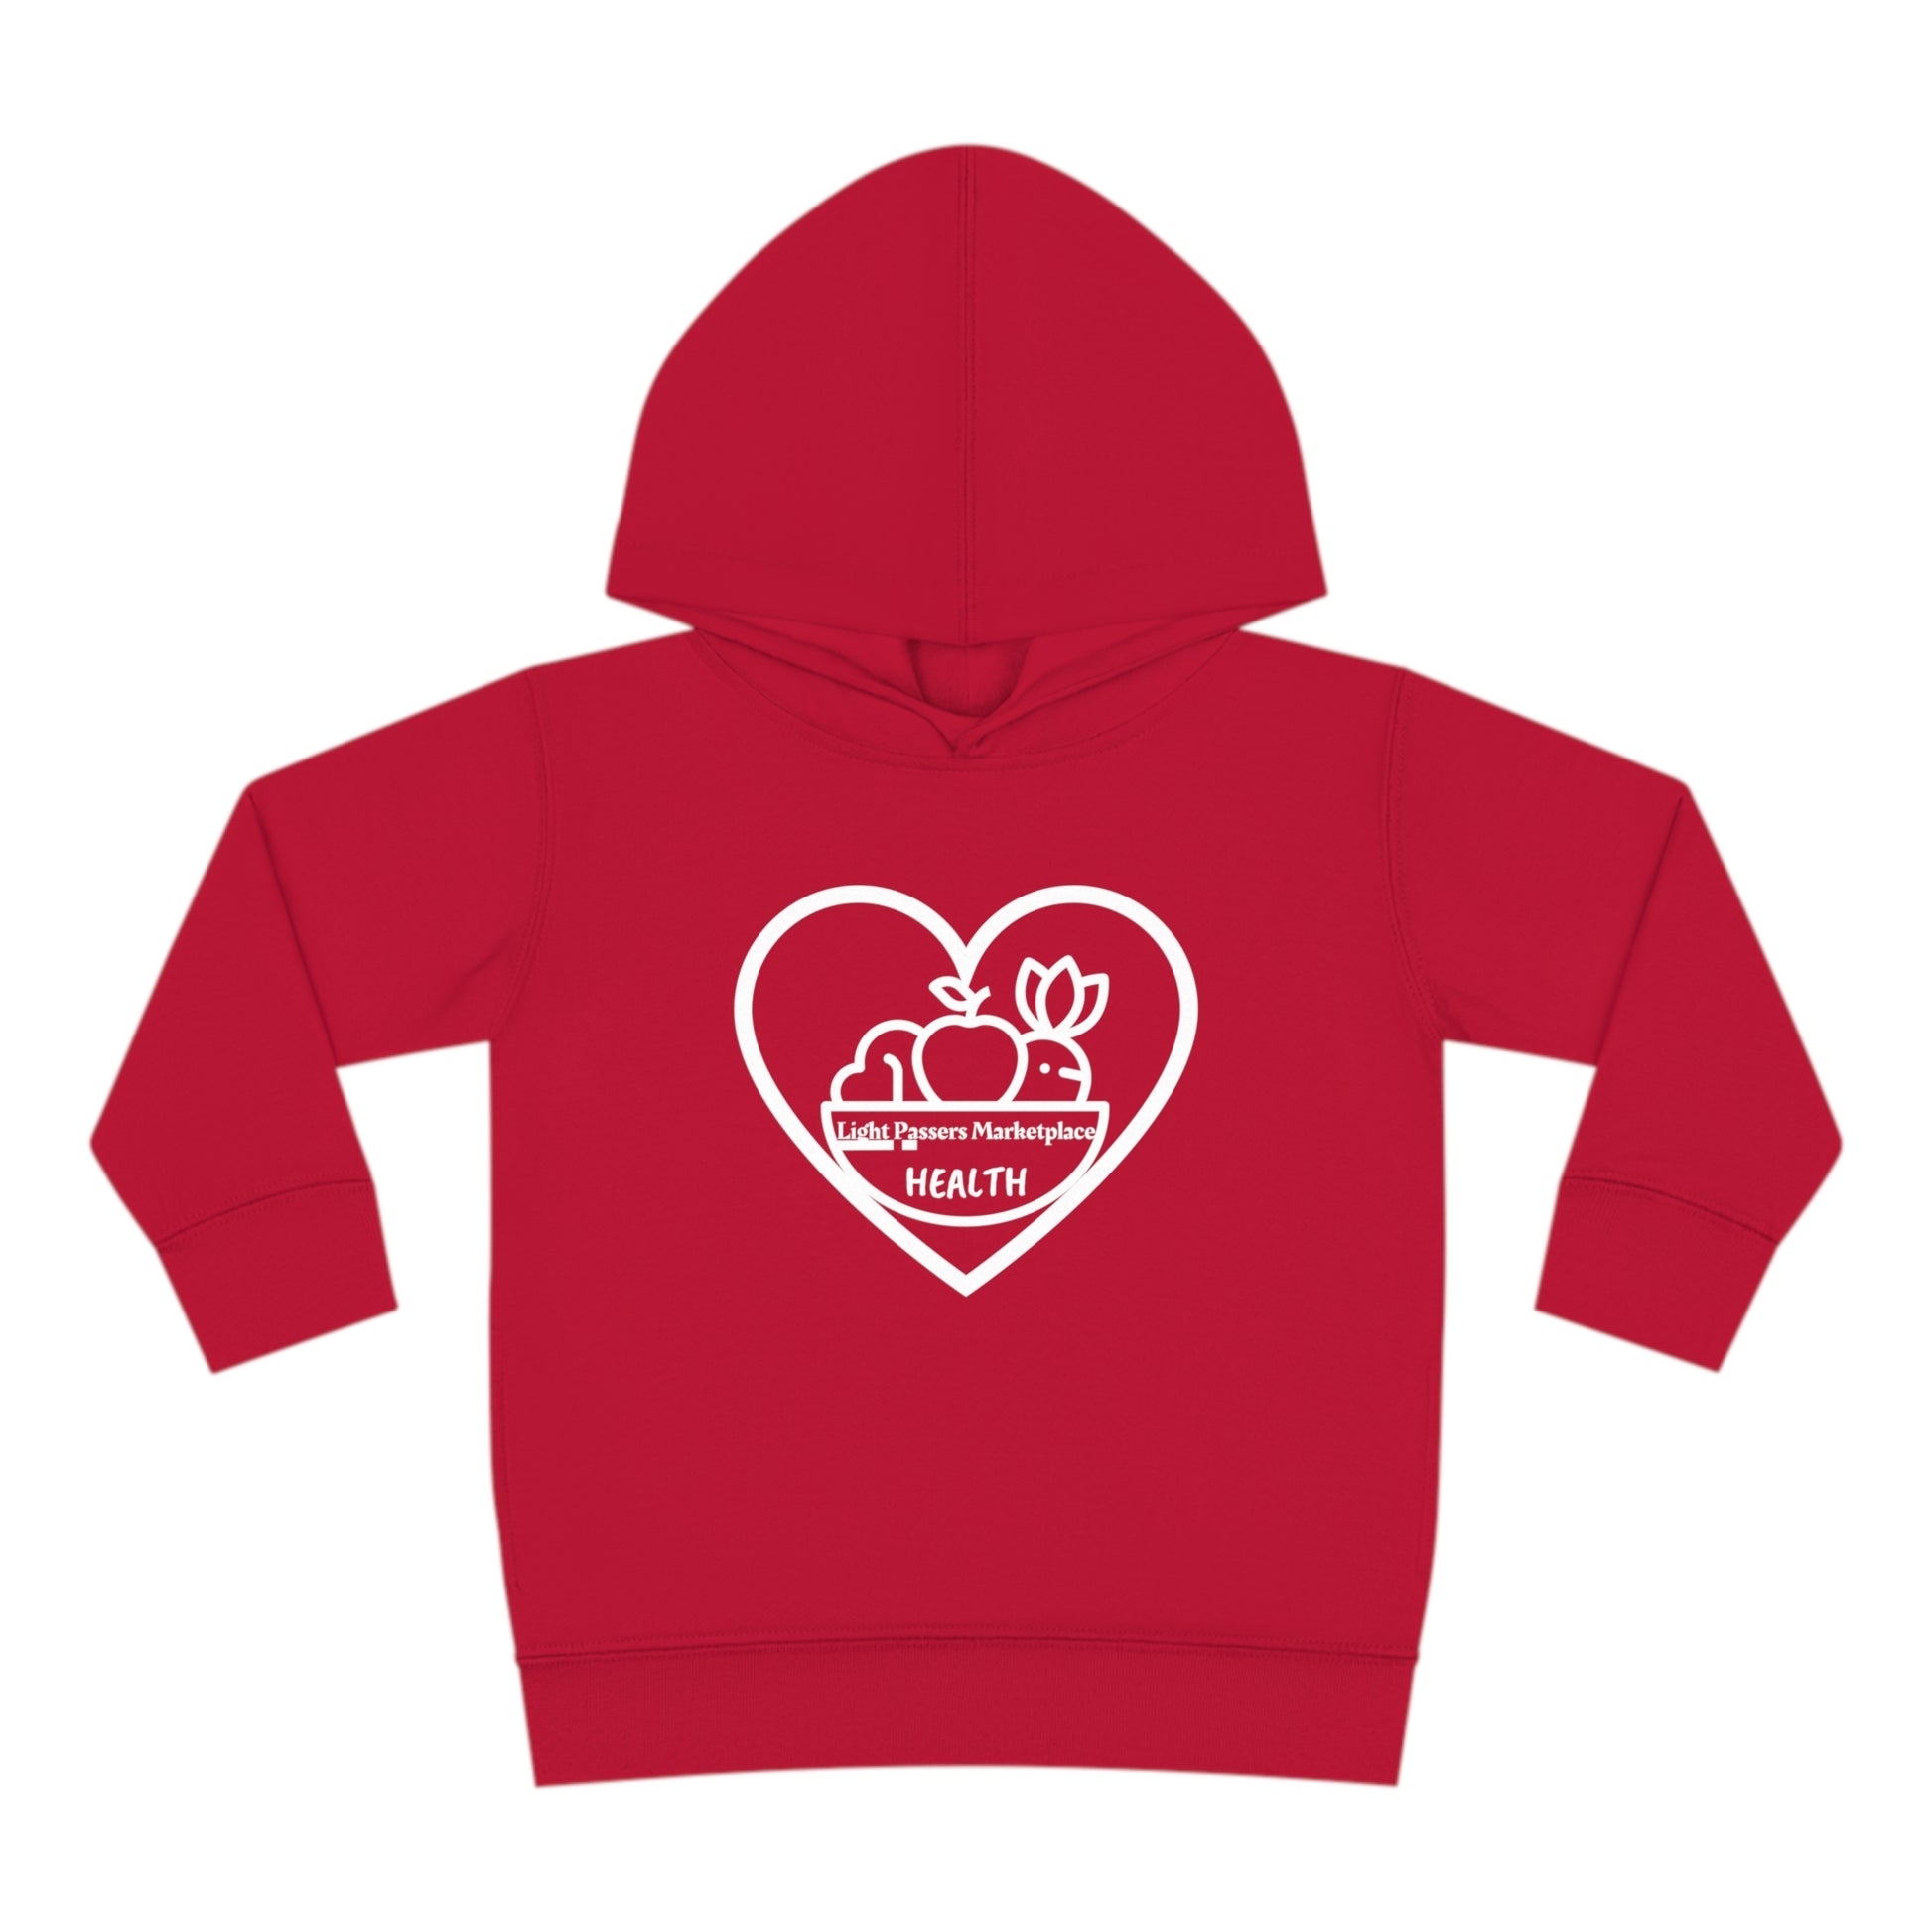 A toddler hoodie featuring a heart and apple logo design, with side seam pockets and double-needle hem hood for durability. Made of 60% cotton, 40% polyester for cozy comfort.